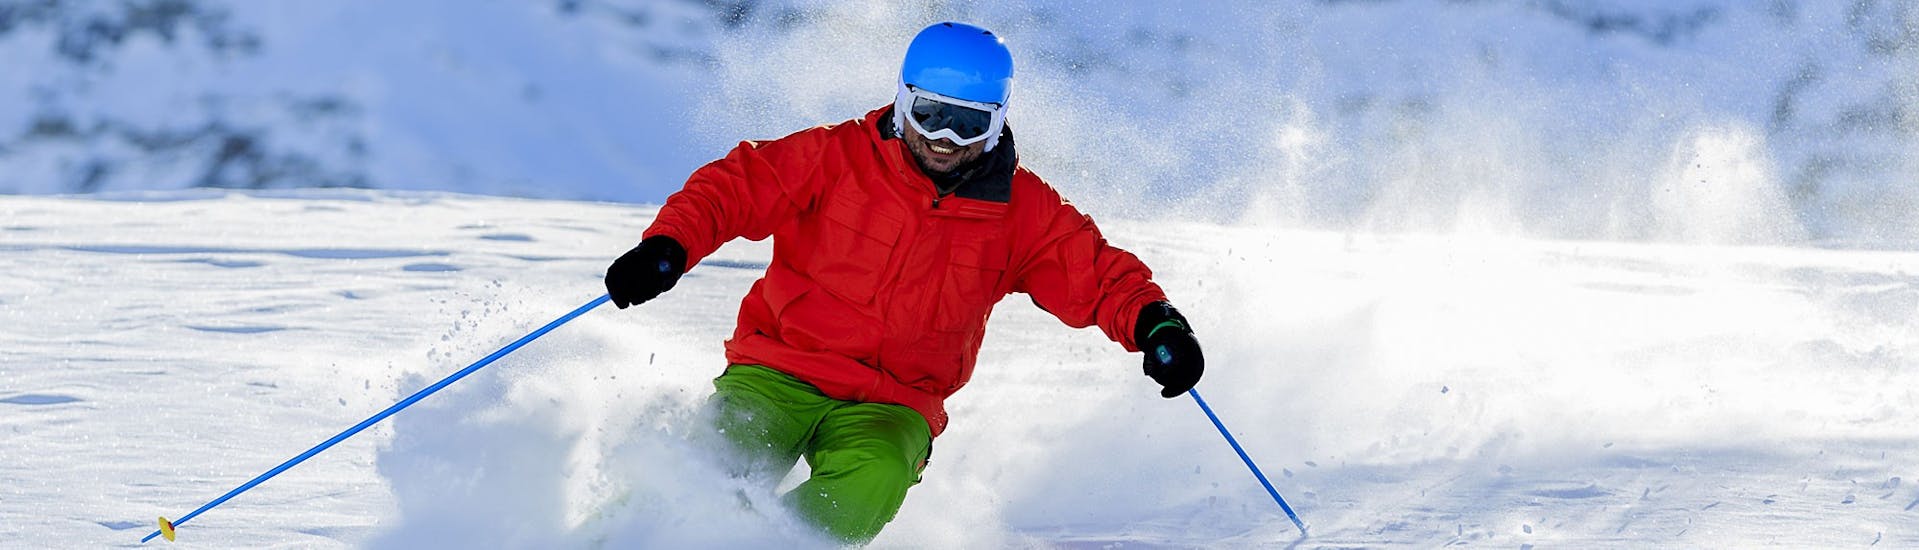 Skier carving down slope during the Private Ski Lessons for Adults of All Levels with G&S snowsportschool Mitterdorf.